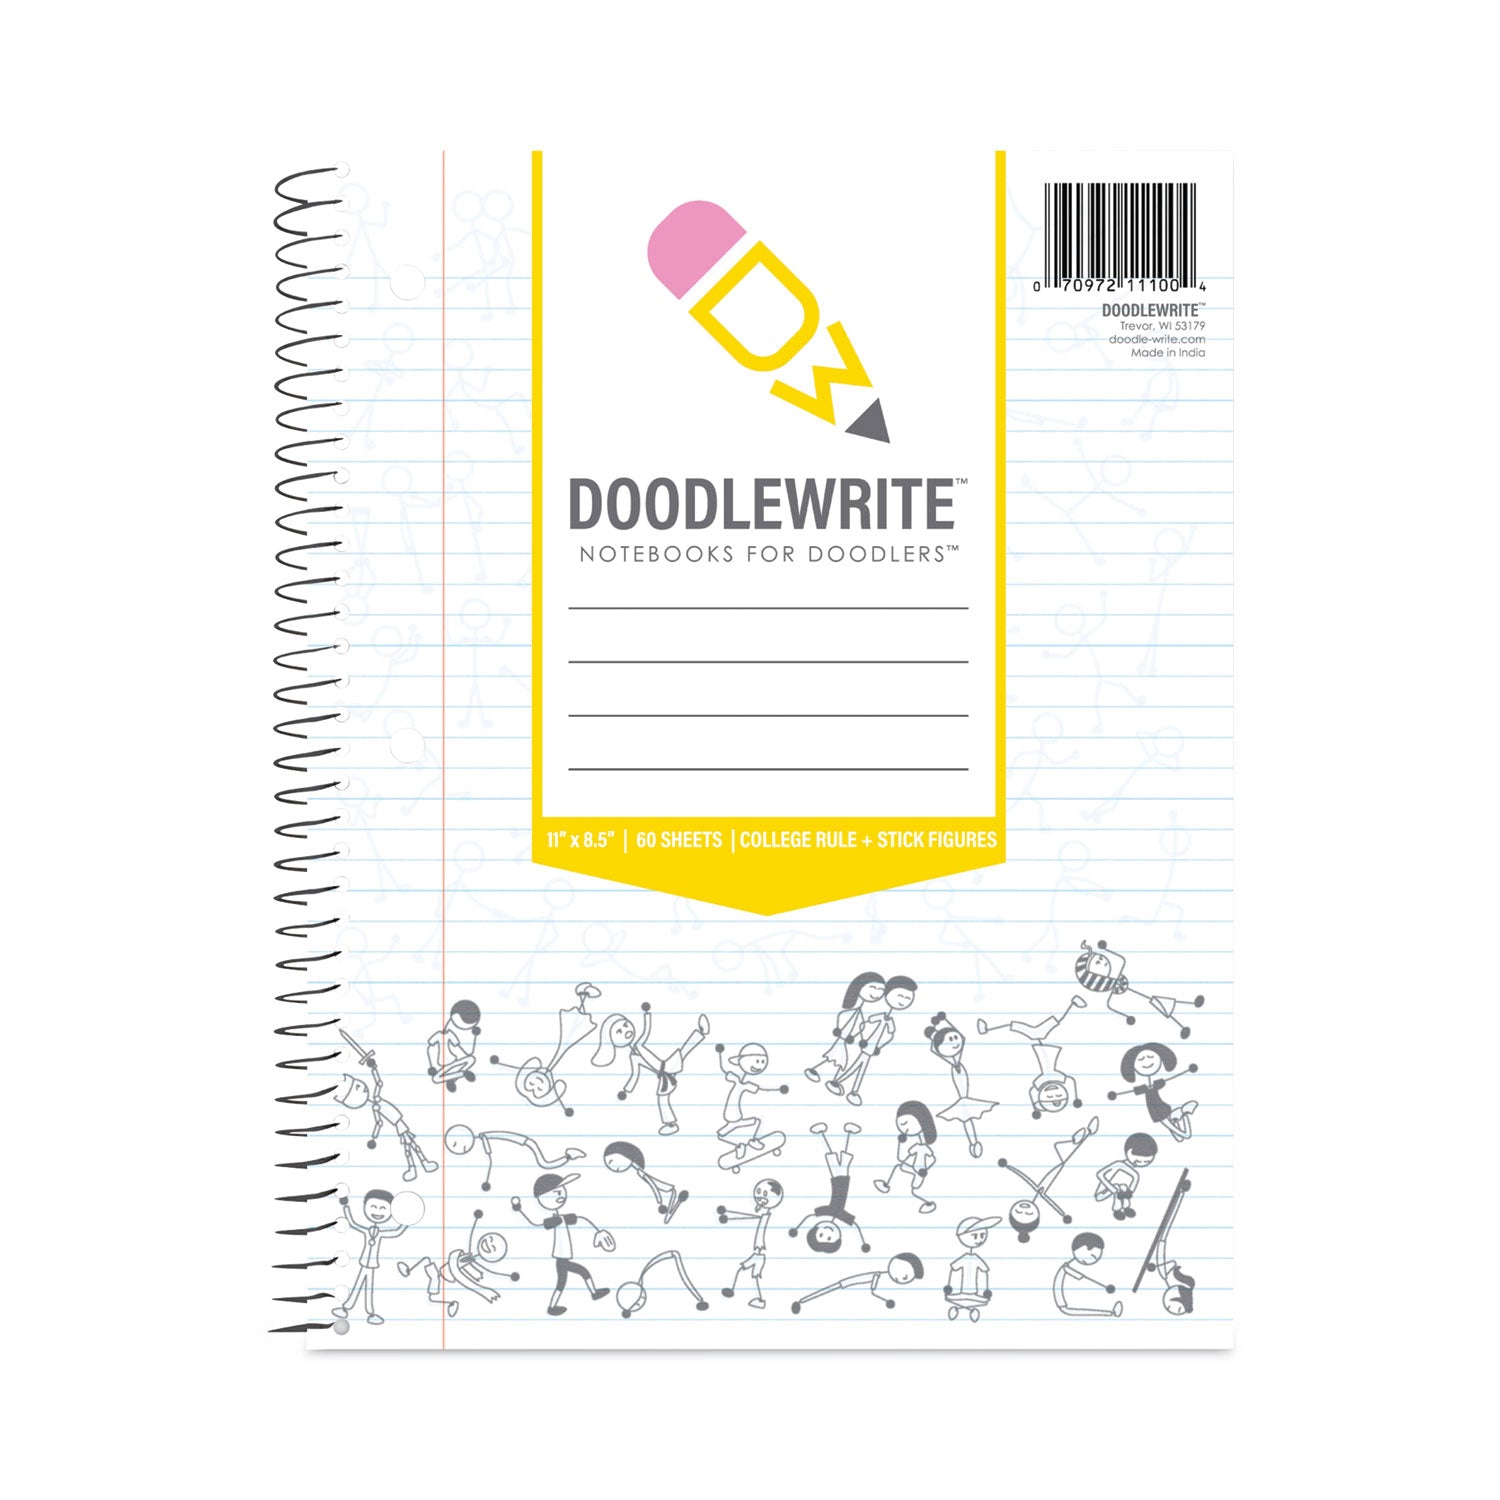 doodlewrite-notebooks-1-subject-wide-legal-rule-white-cover-50-sheets-24-carton-ships-in-4-6-business-days_roa11101cs - 1